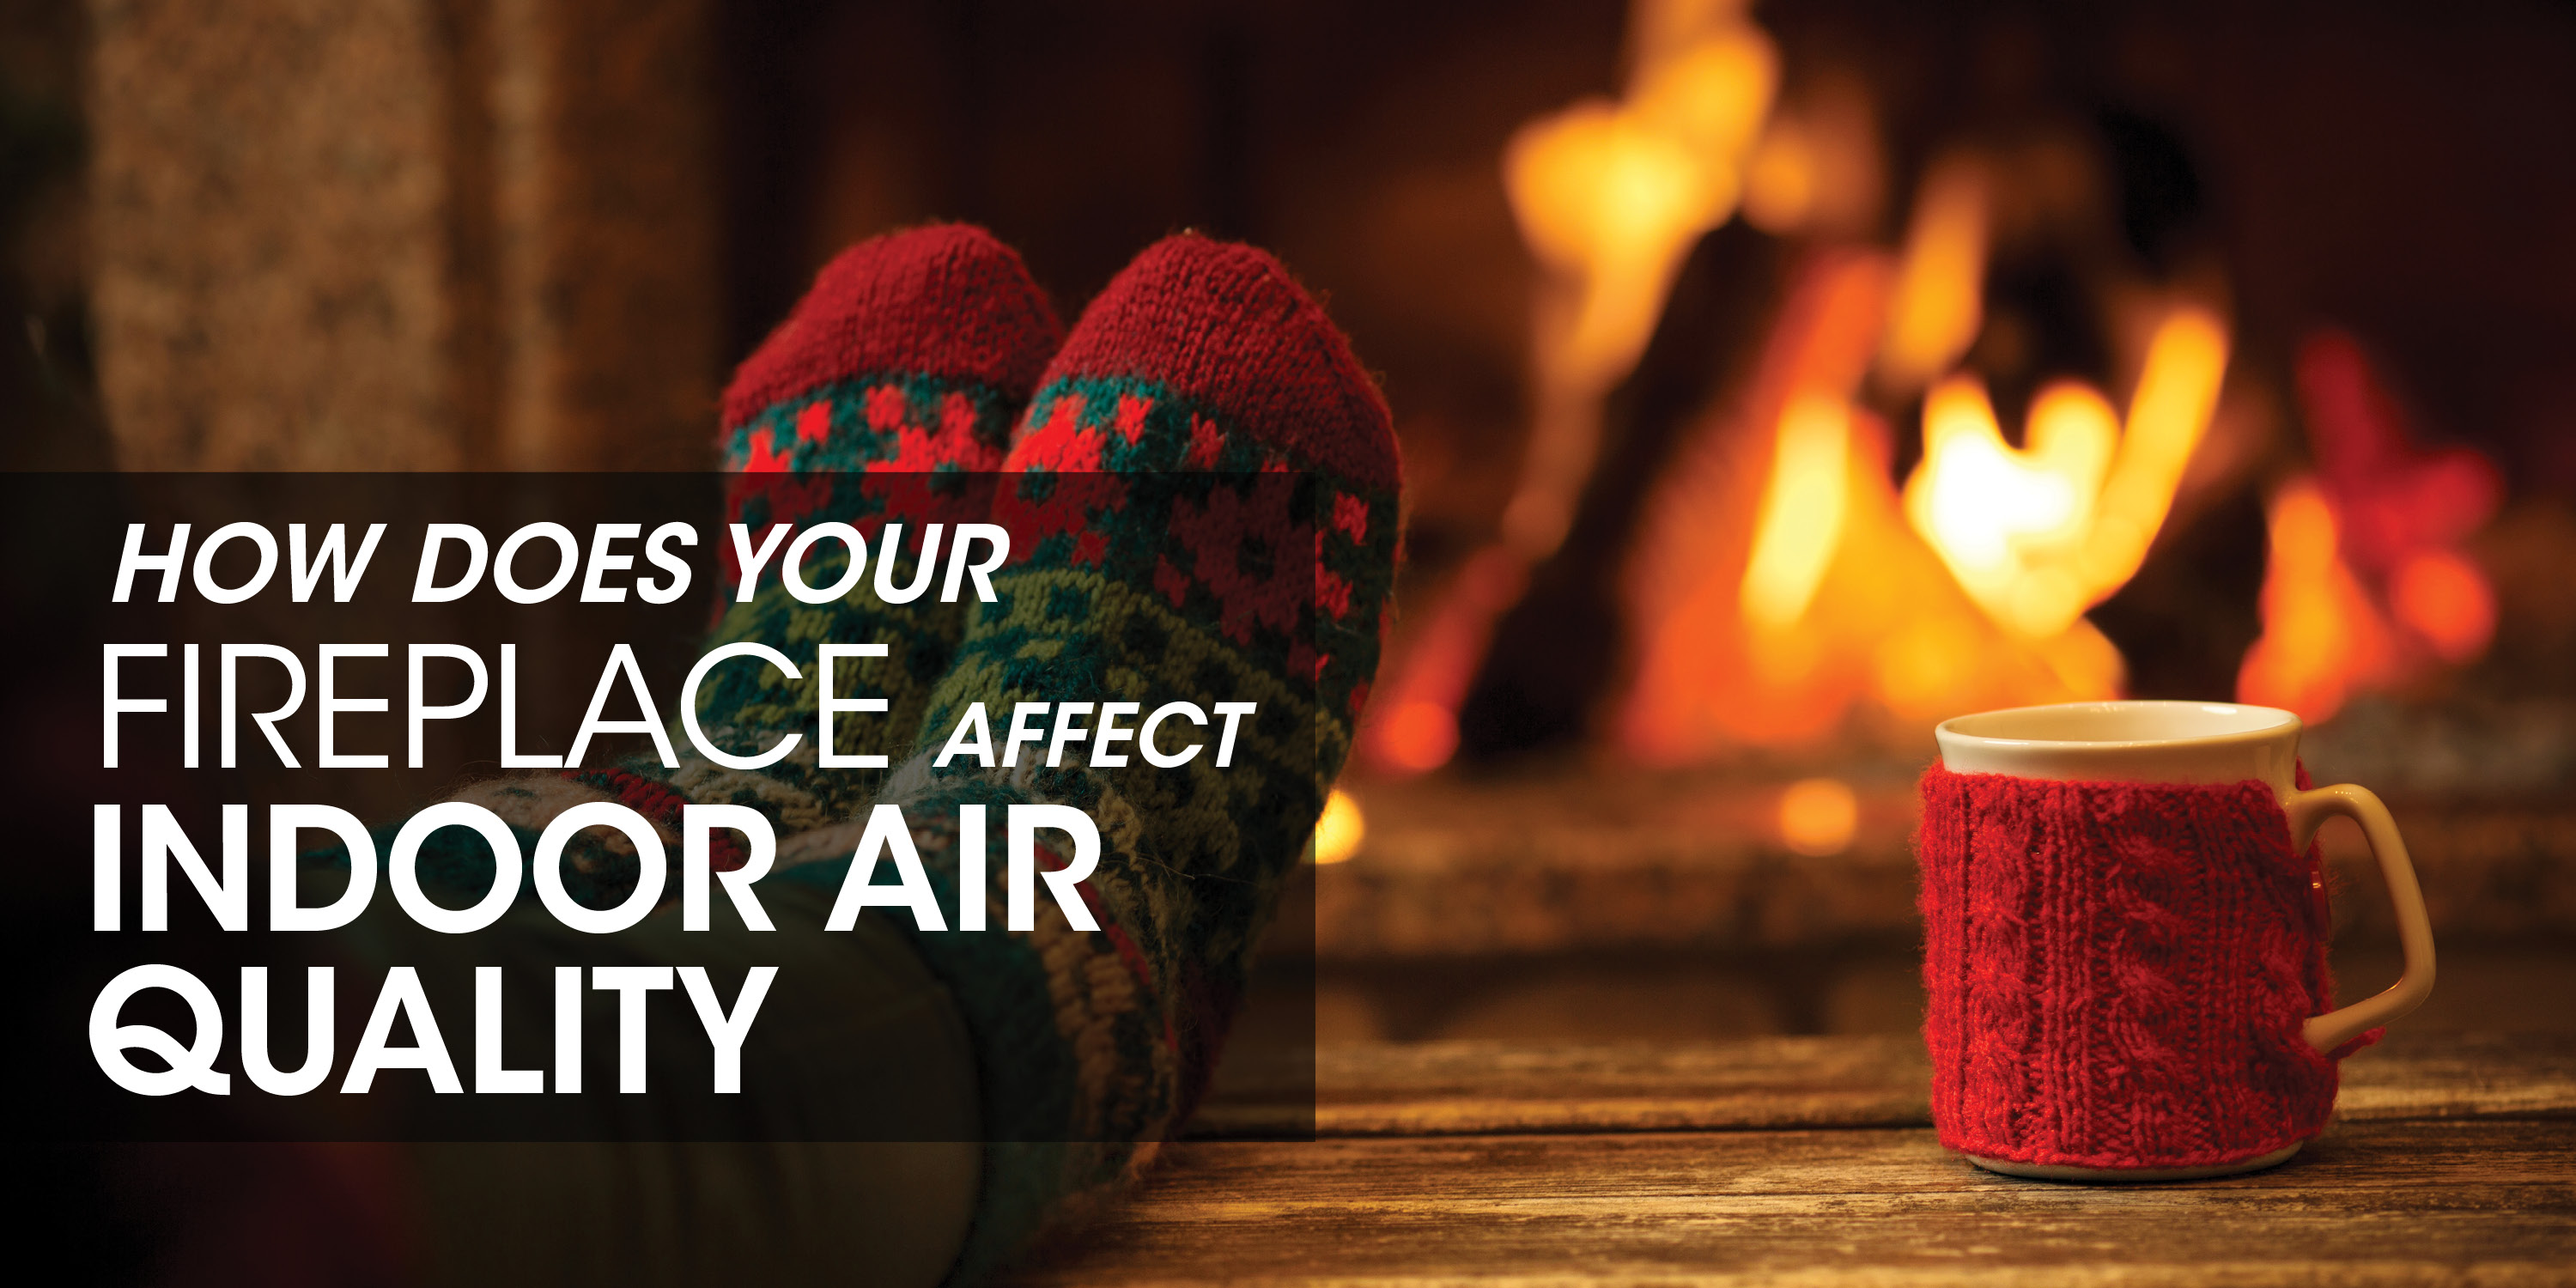 Person by fireplace with text: "How does your fireplace affect indoor air quality"